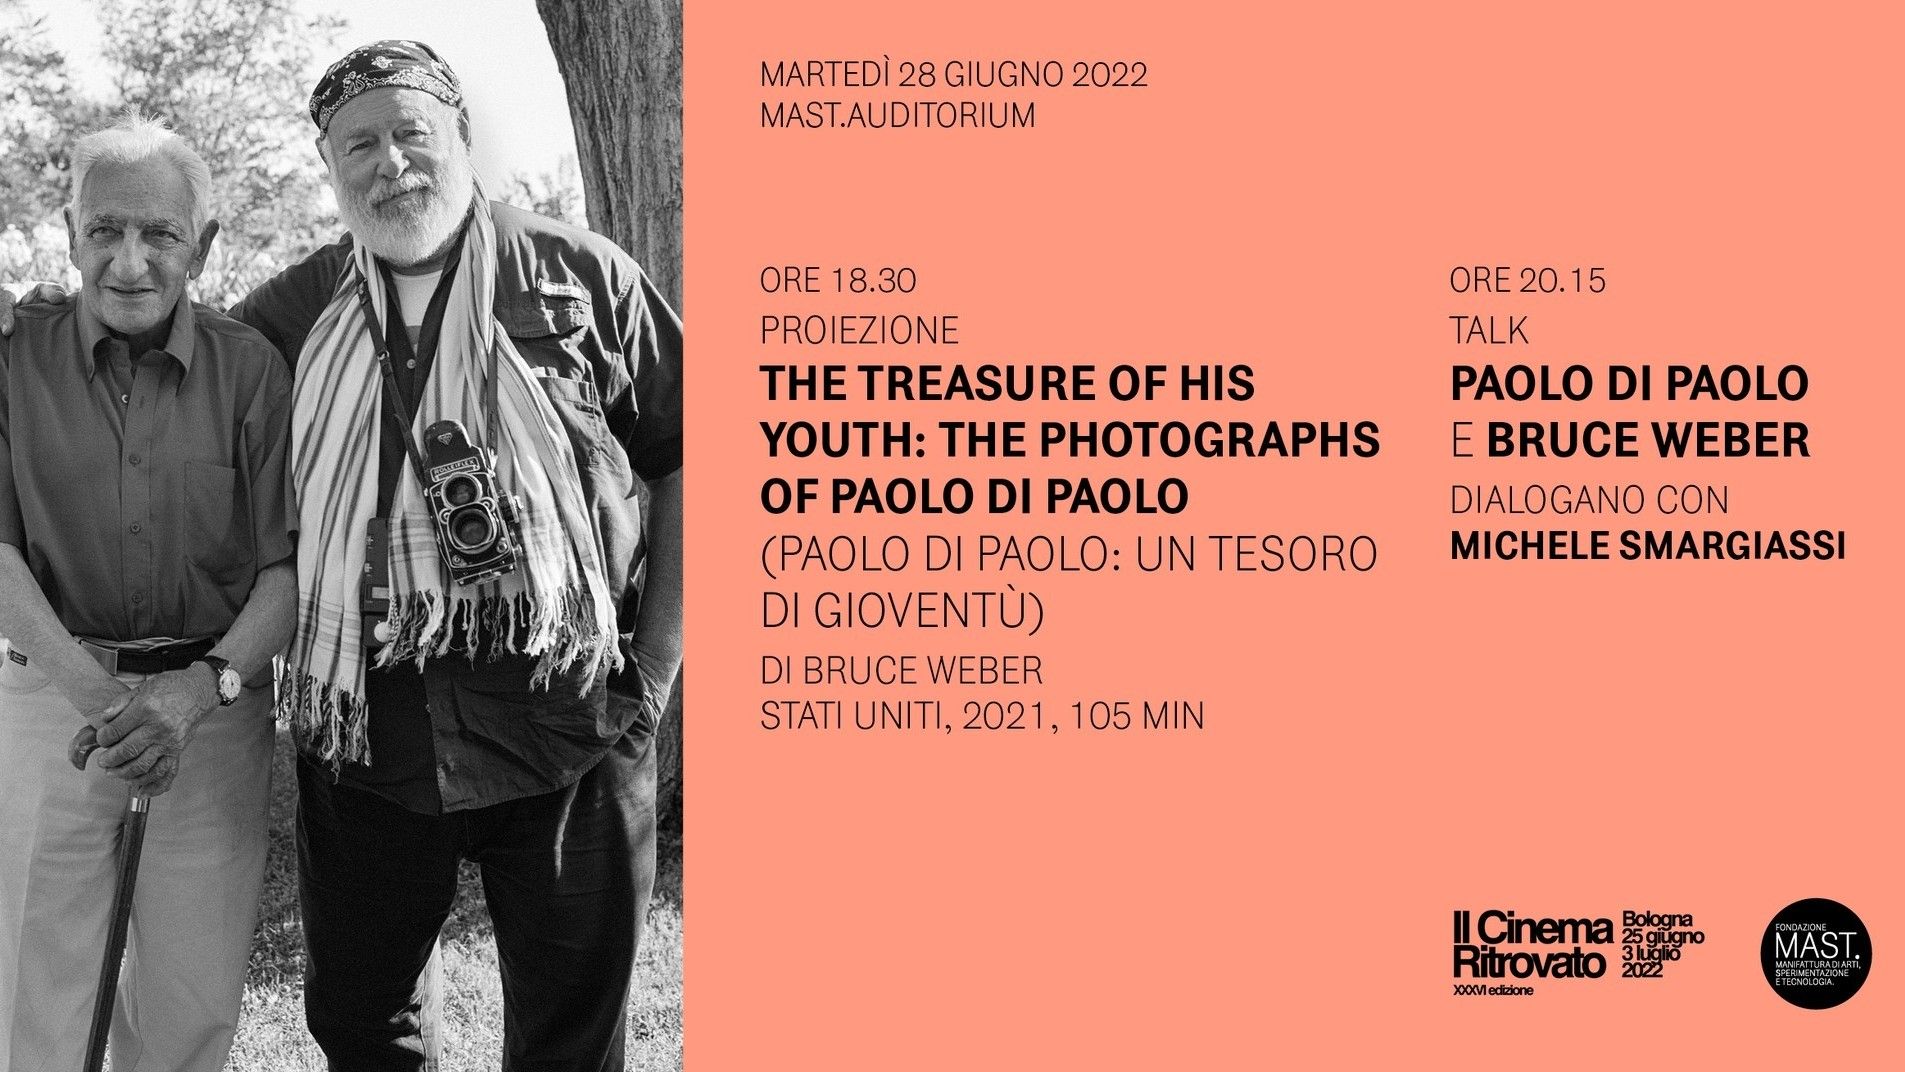 The Treasure Of His Youth: The Photographs Of Paolo Di Paolo